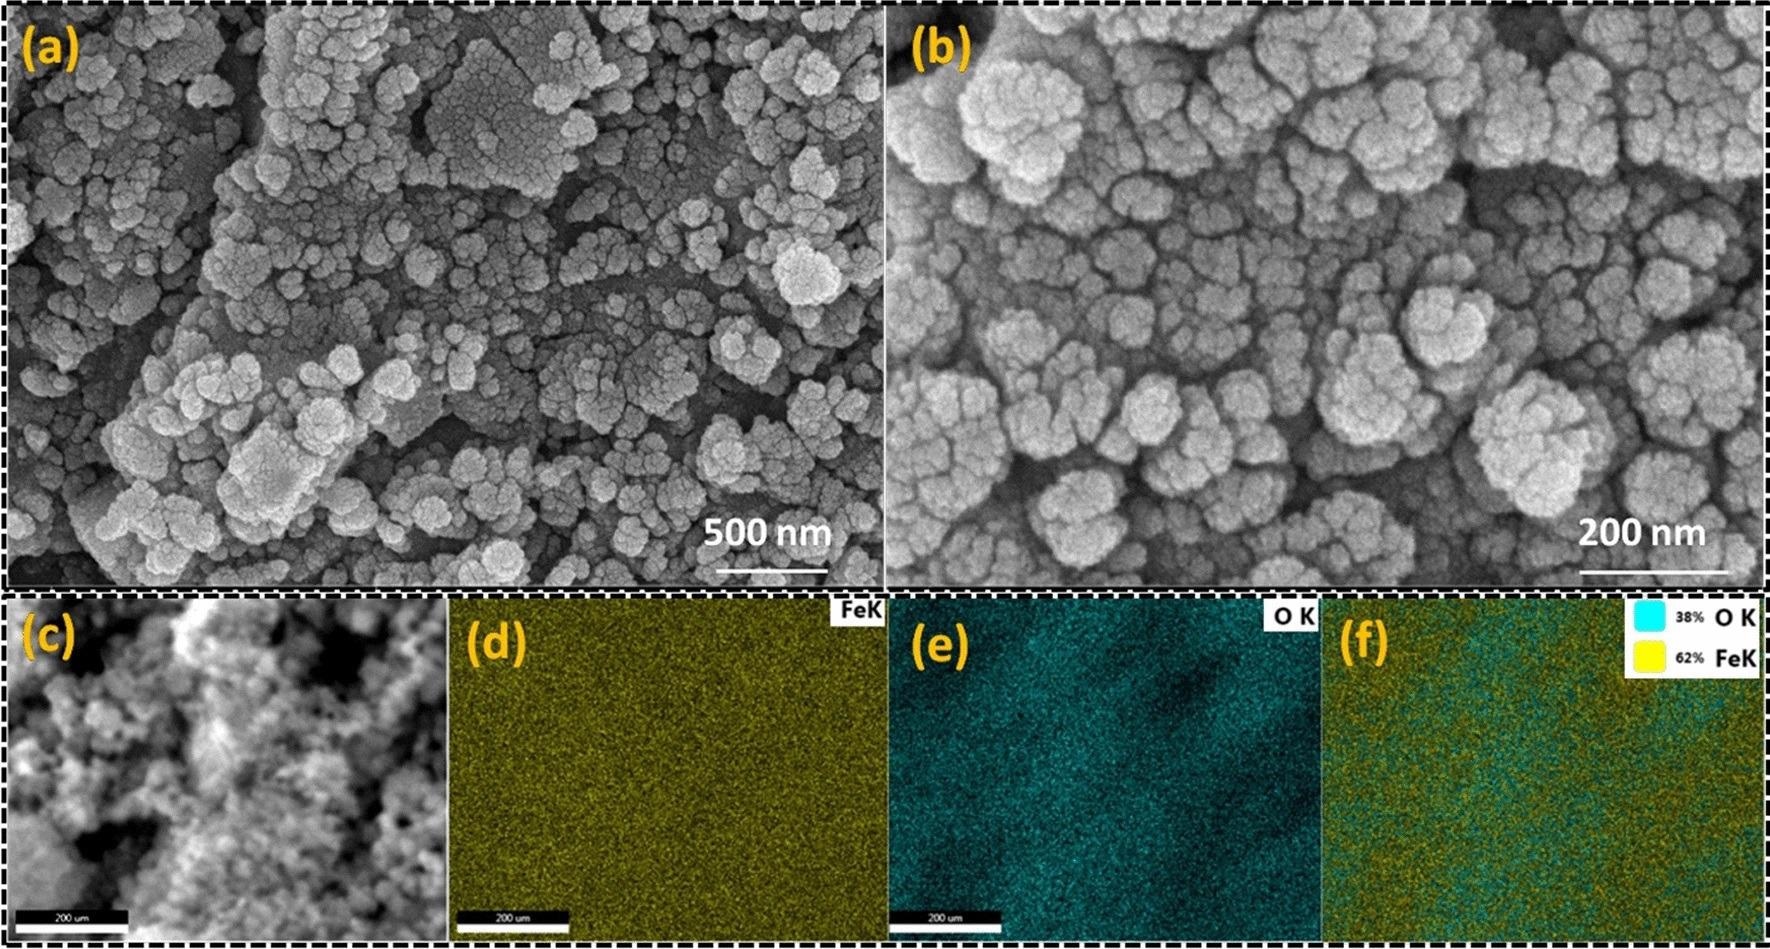 FE-SEM micrograph of Fe3O4/a-F2O3 nanocomposite at two different magnifications (a, b), selected micrograph for the elemental mapping (c), elemental mapping for the iron (d), oxygen (e) and the overlapping of the iron and oxygen element (f).